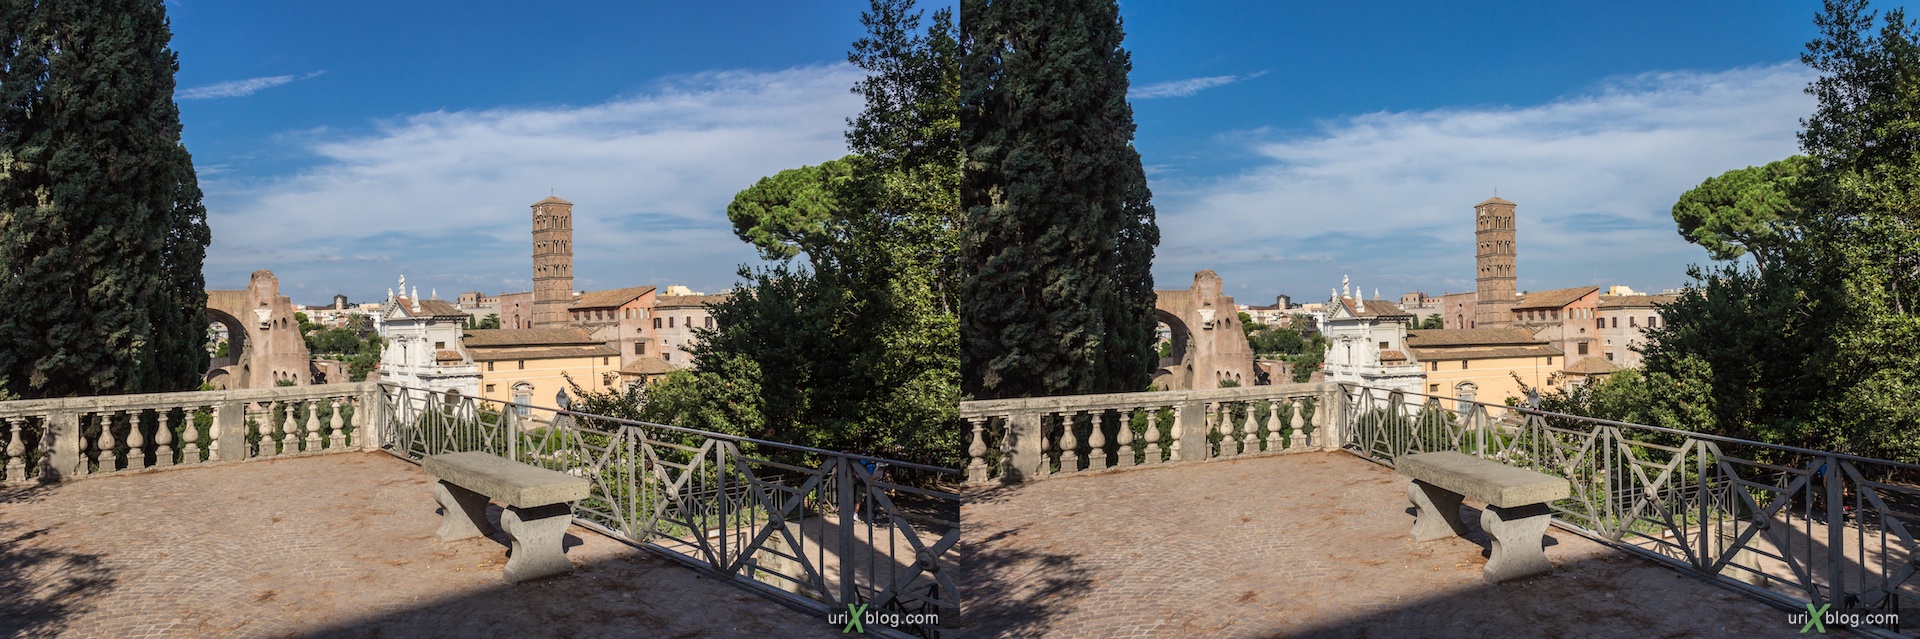 2012, Roman Forum, Palatine Hill, Rome, Italy, ancient rome, city, 3D, stereo pair, cross-eyed, crossview, cross view stereo pair